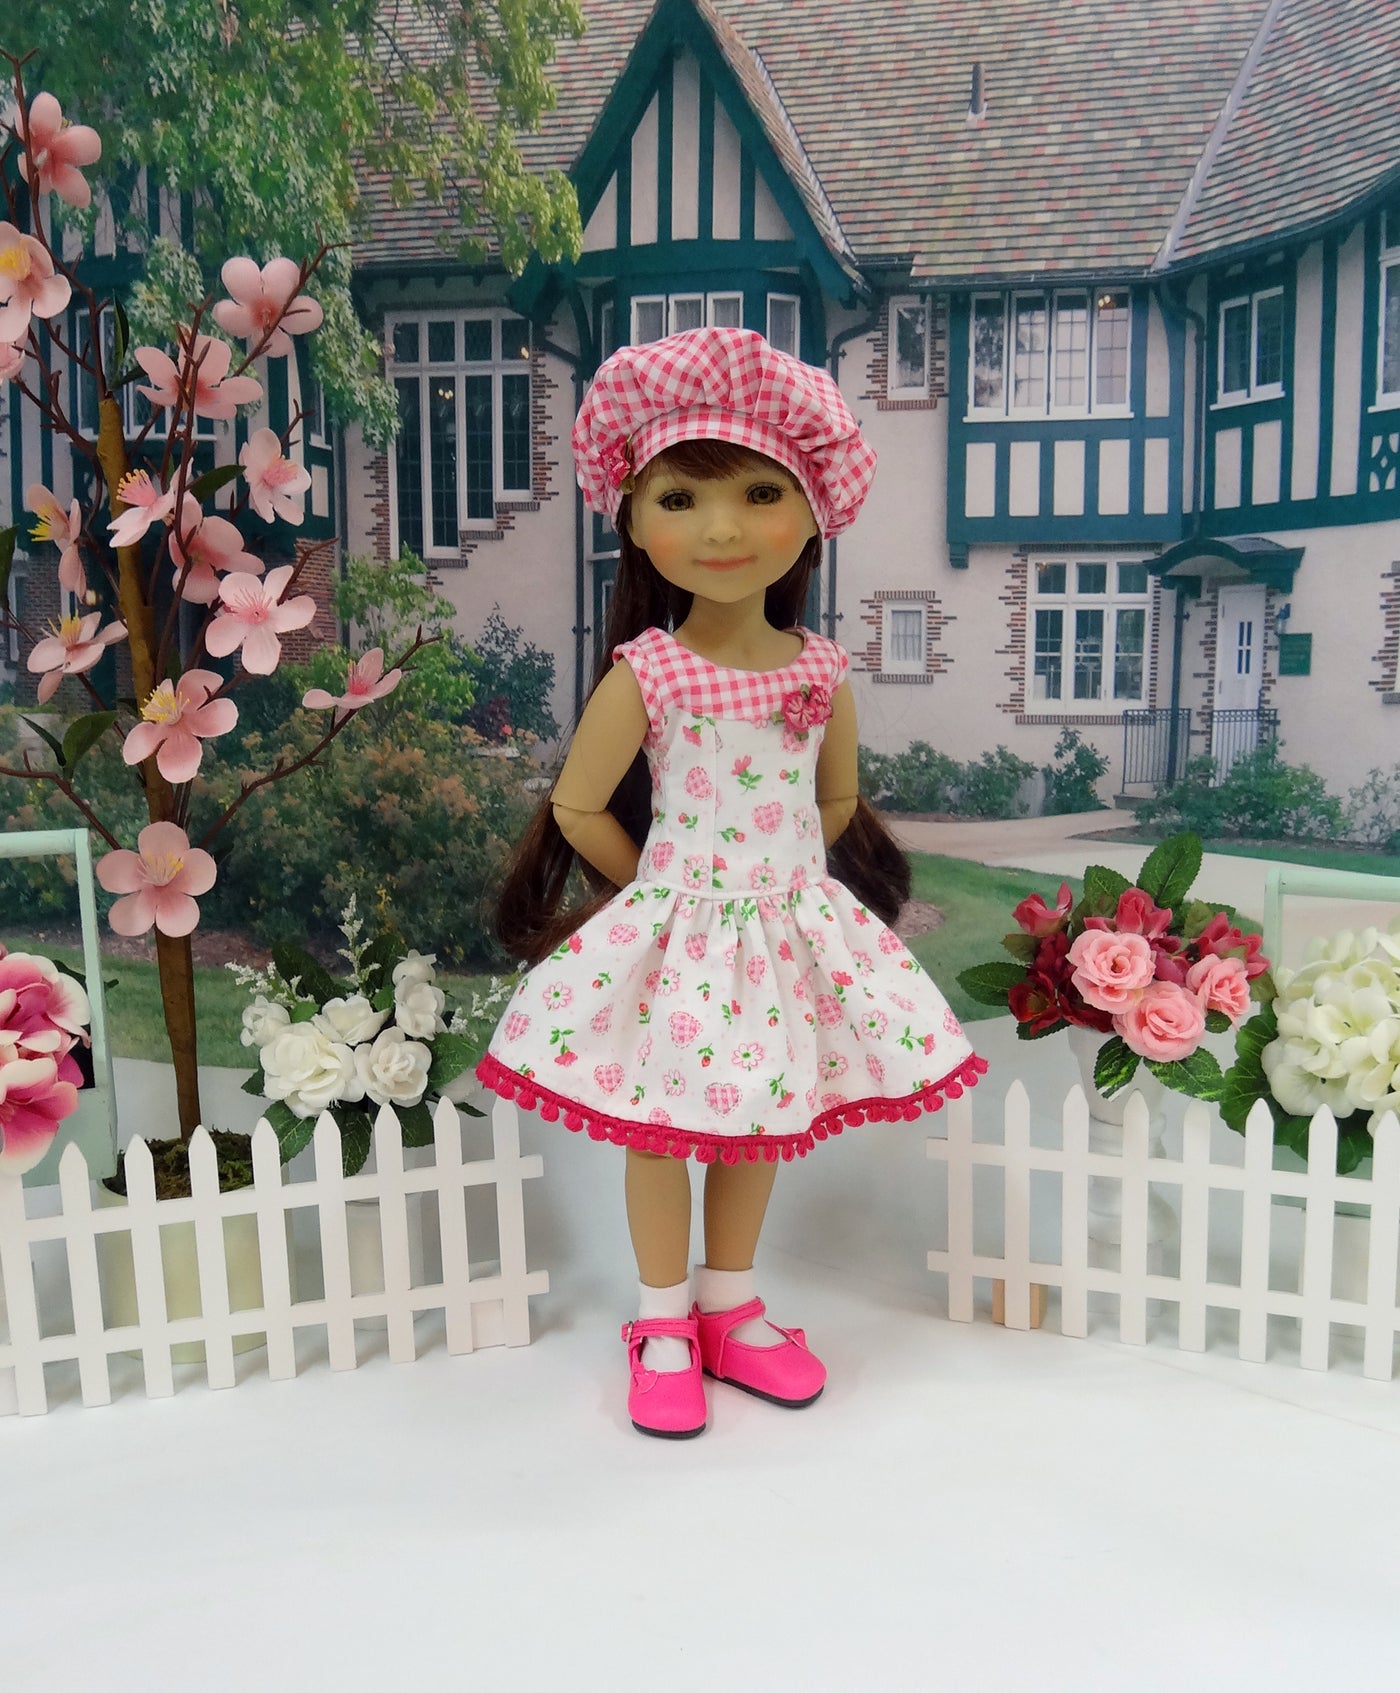 Pink Gingham Heart - dress for Ruby Red Fashion Friends doll